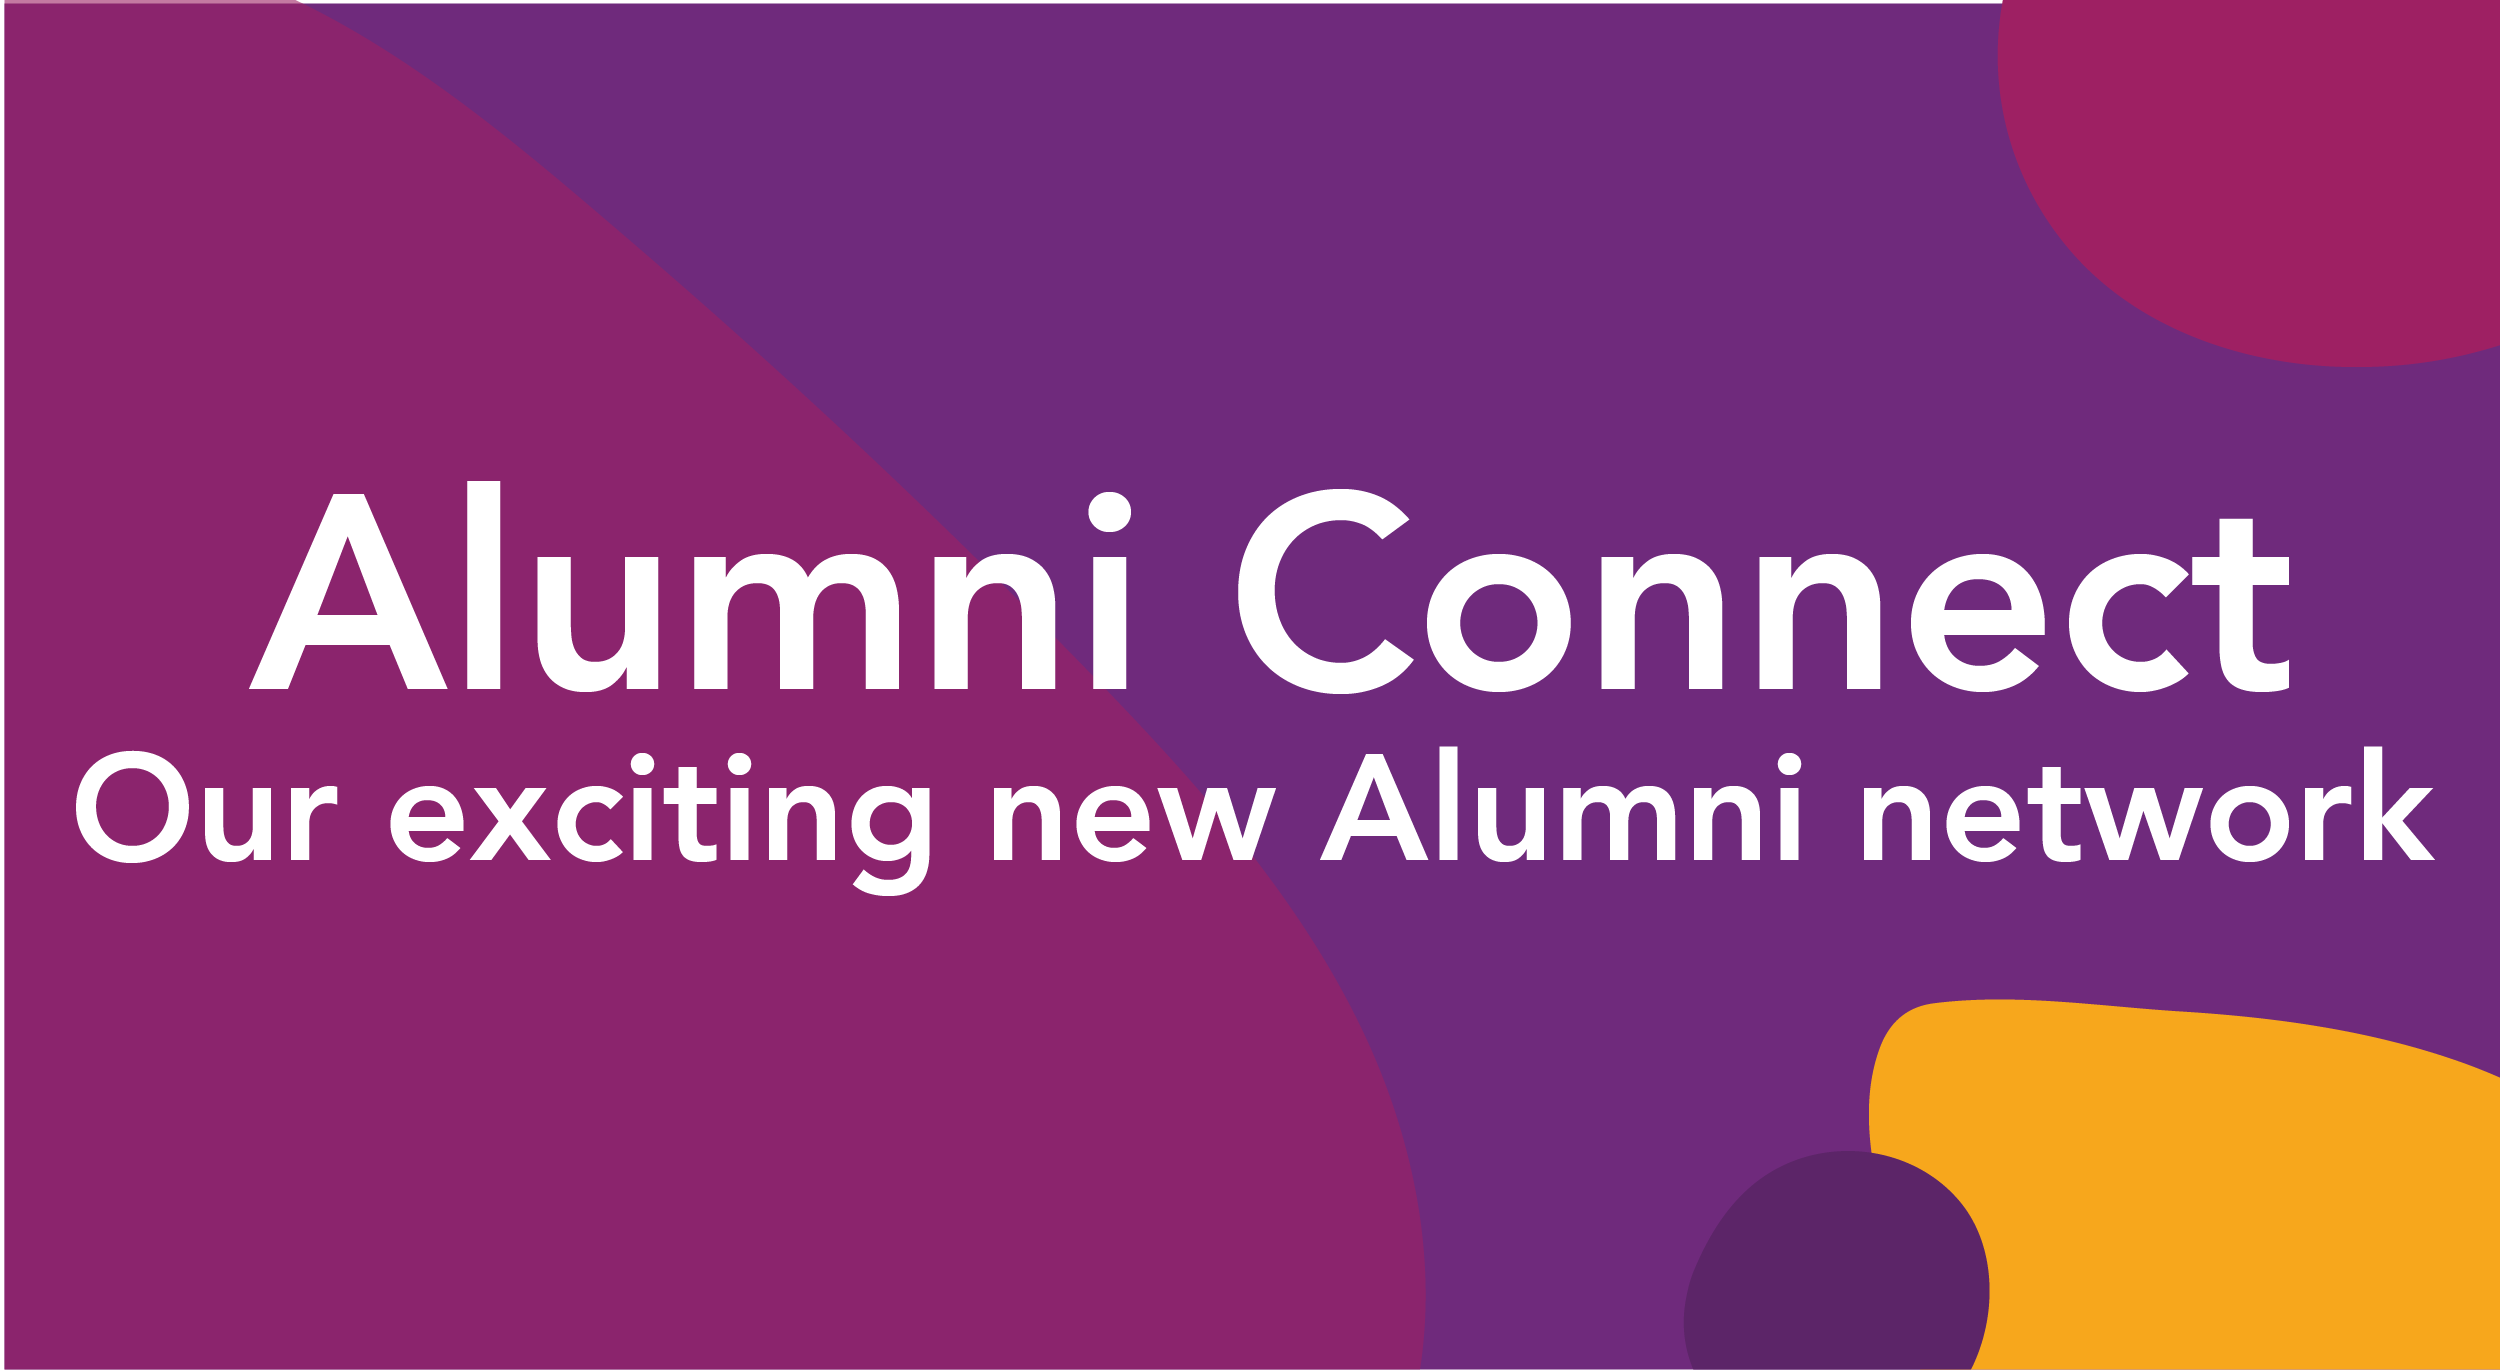 Alumni Connect. Our exciting new Alumni network.